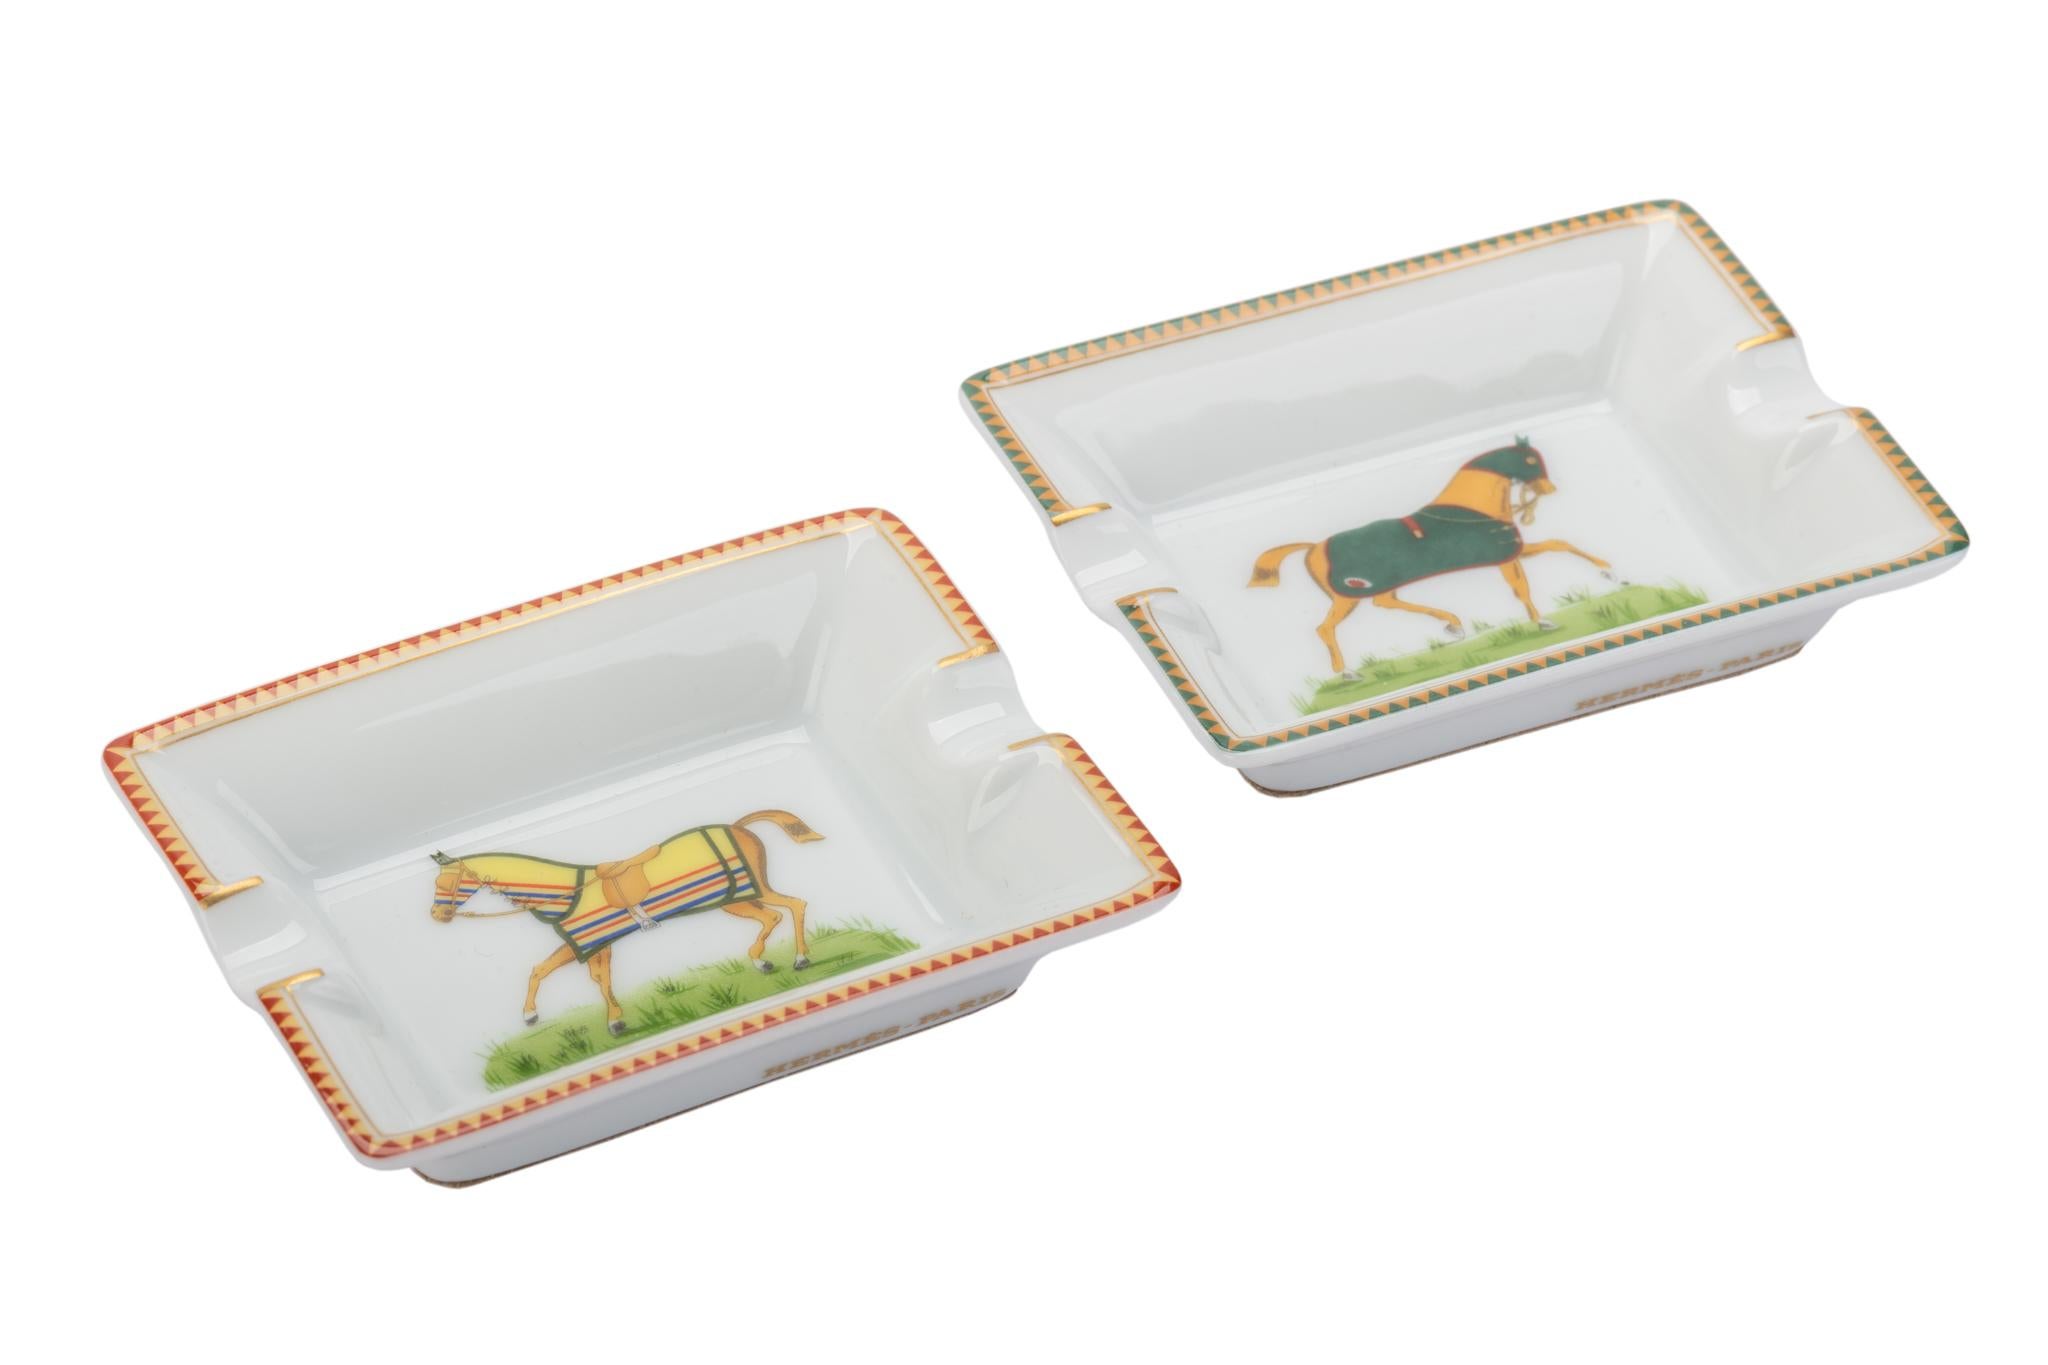 Hermes brand new in box pair of small porcelain ashtrays with horse design. Come with original box.